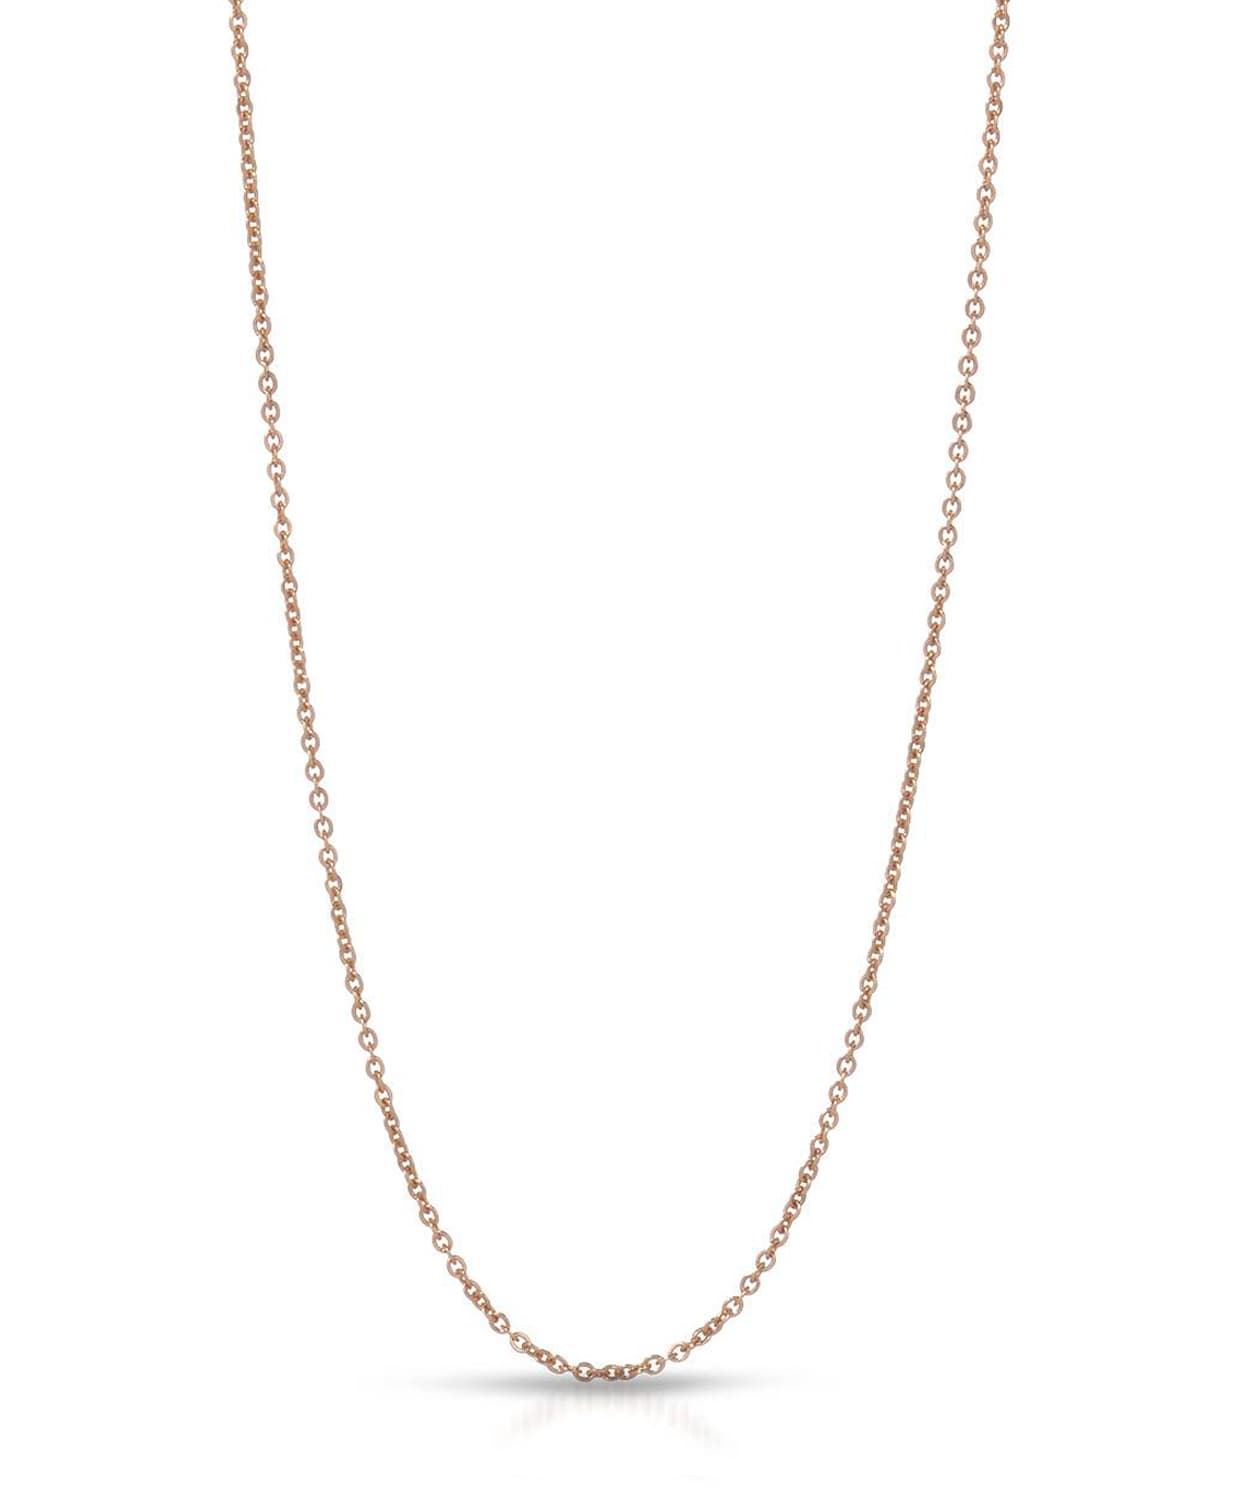 1.0mm 14k Rose Gold Diamond Cut Oval Rolo Chain View 1